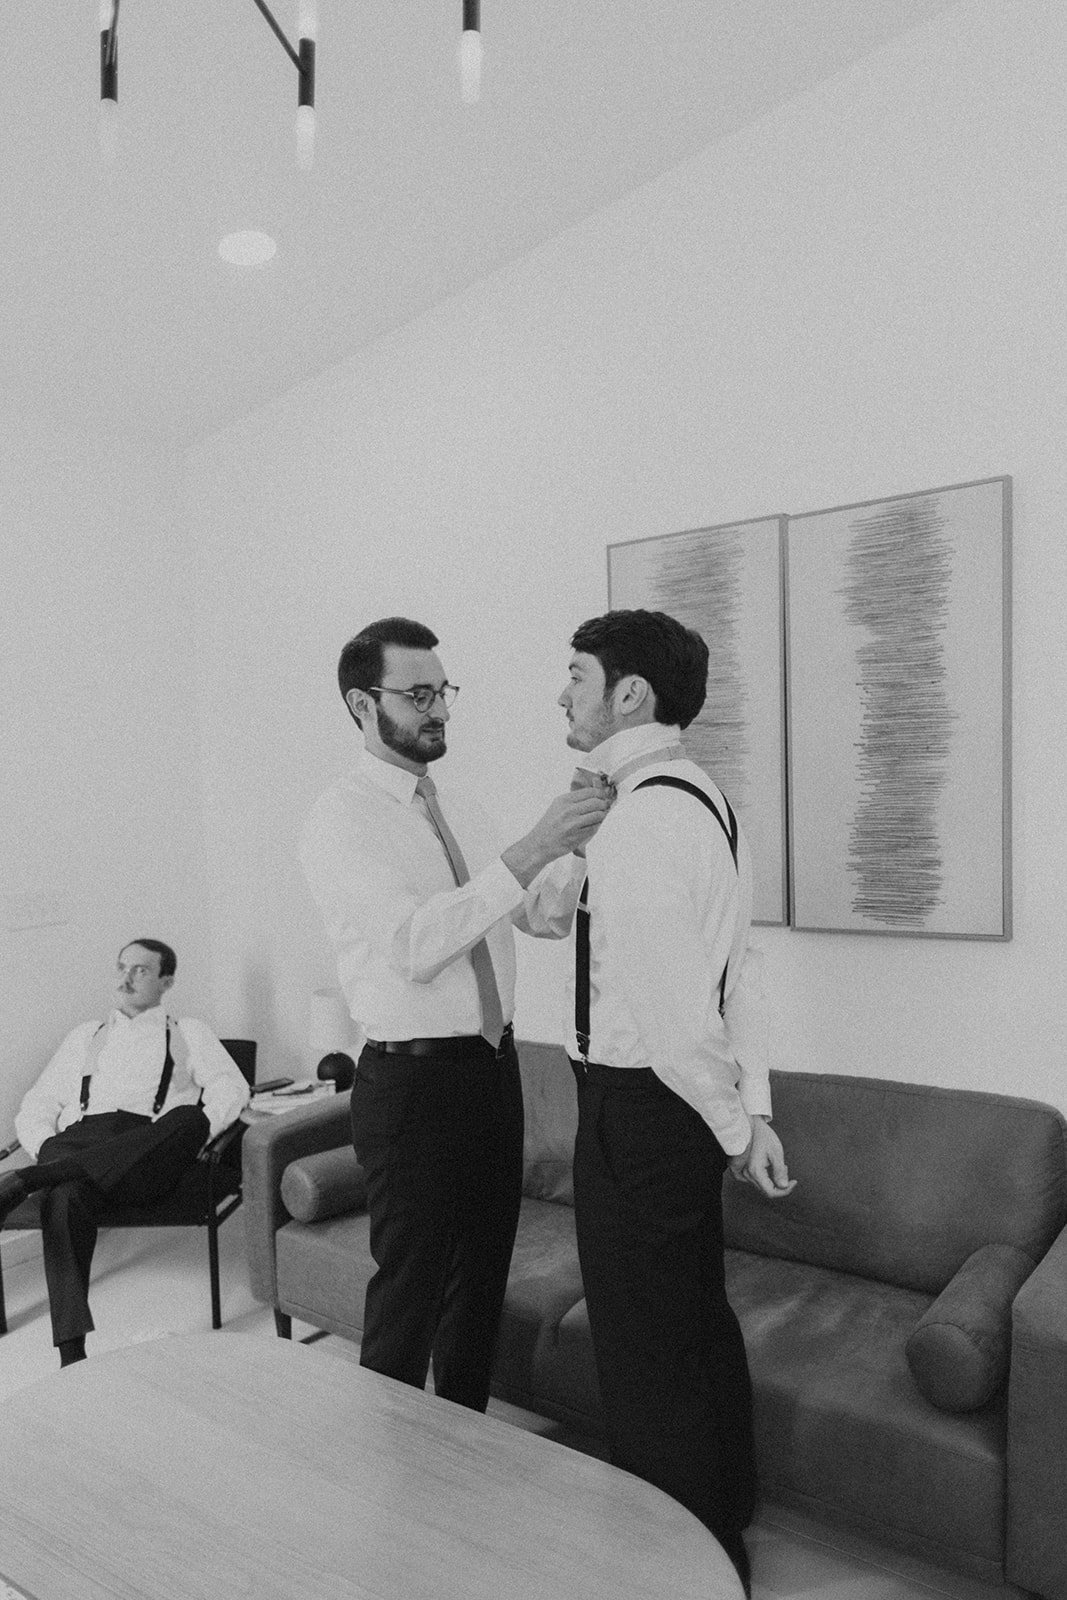 The groom assisting one of his groomsmen's with tying his bow-tie.